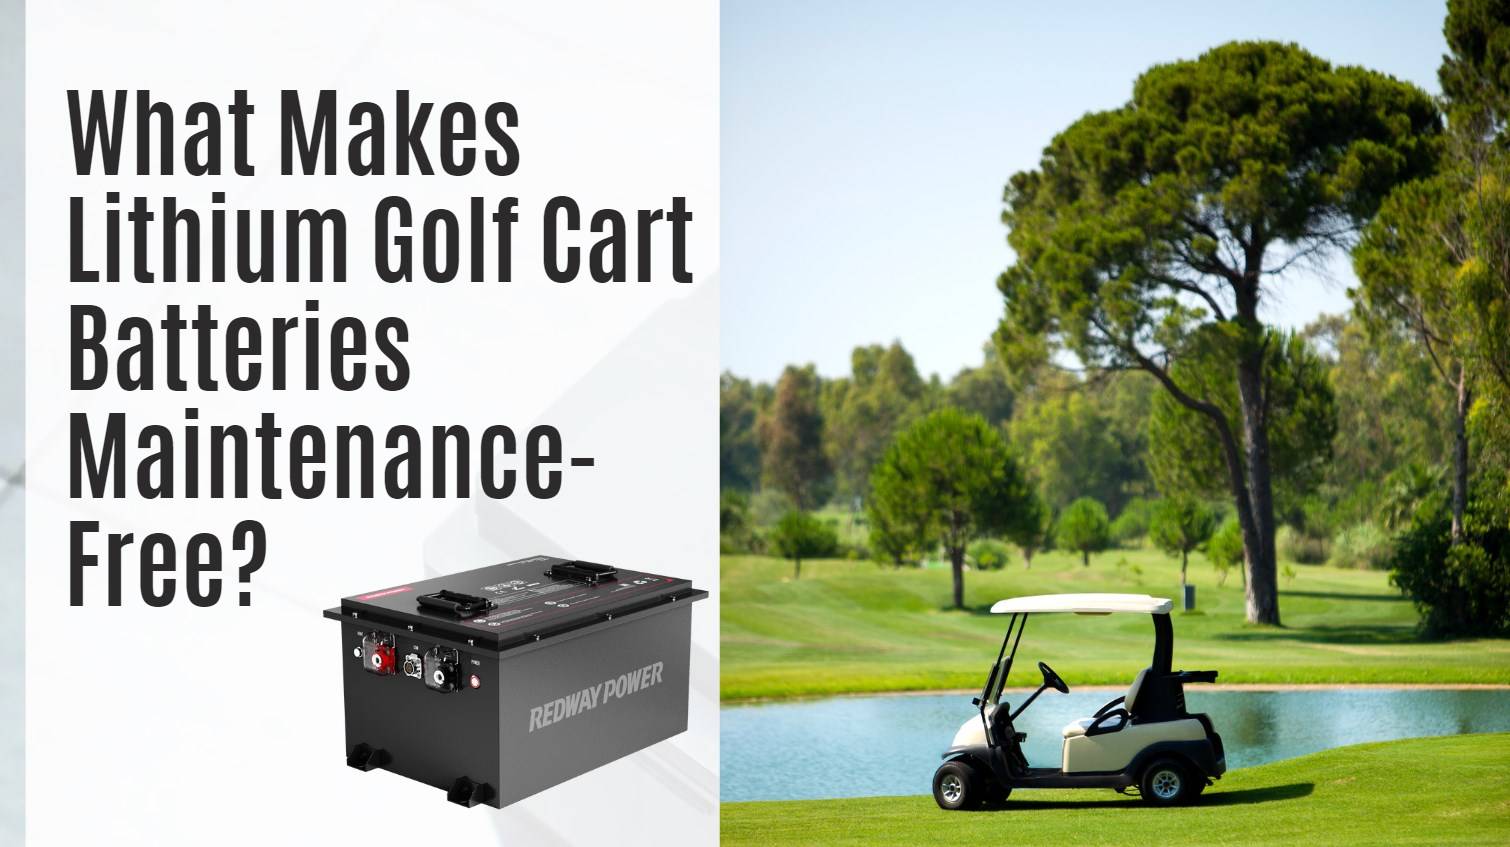 What Makes Lithium Golf Cart Batteries Maintenance-Free?golf cart 48v 100ah 150ah lifepo4 battery redway safety